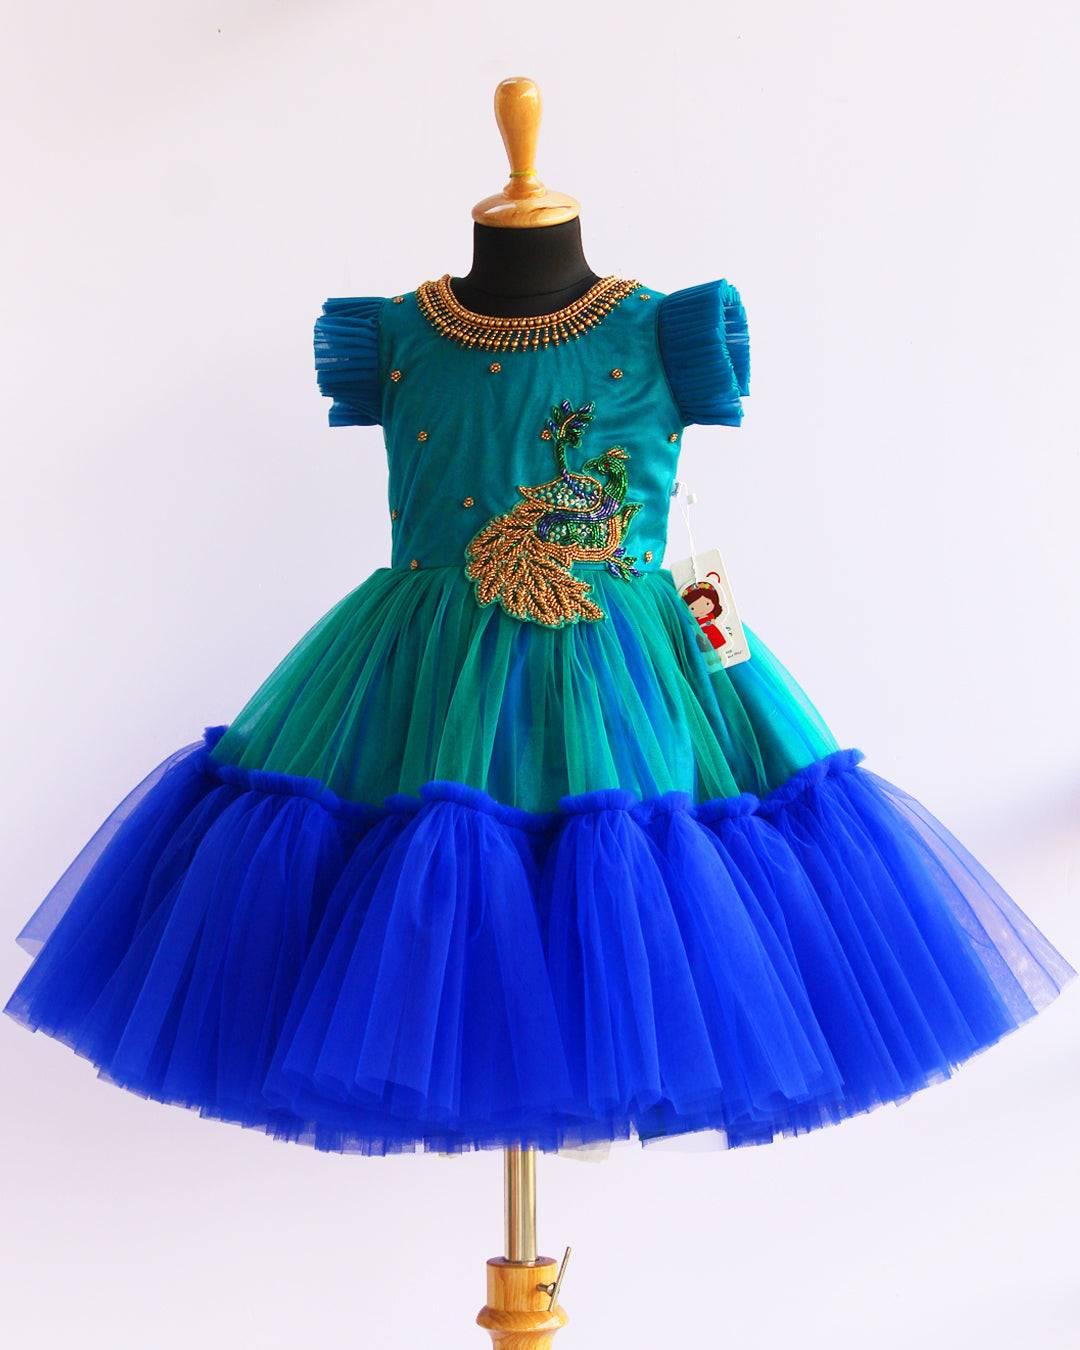 Peacock theme Applique Party wear Frock.
Material: Royal blue and Tourqise green colour net is using in the main portion of the dress. Royal blue colour net is pleating in the bottom portion. Over all colo